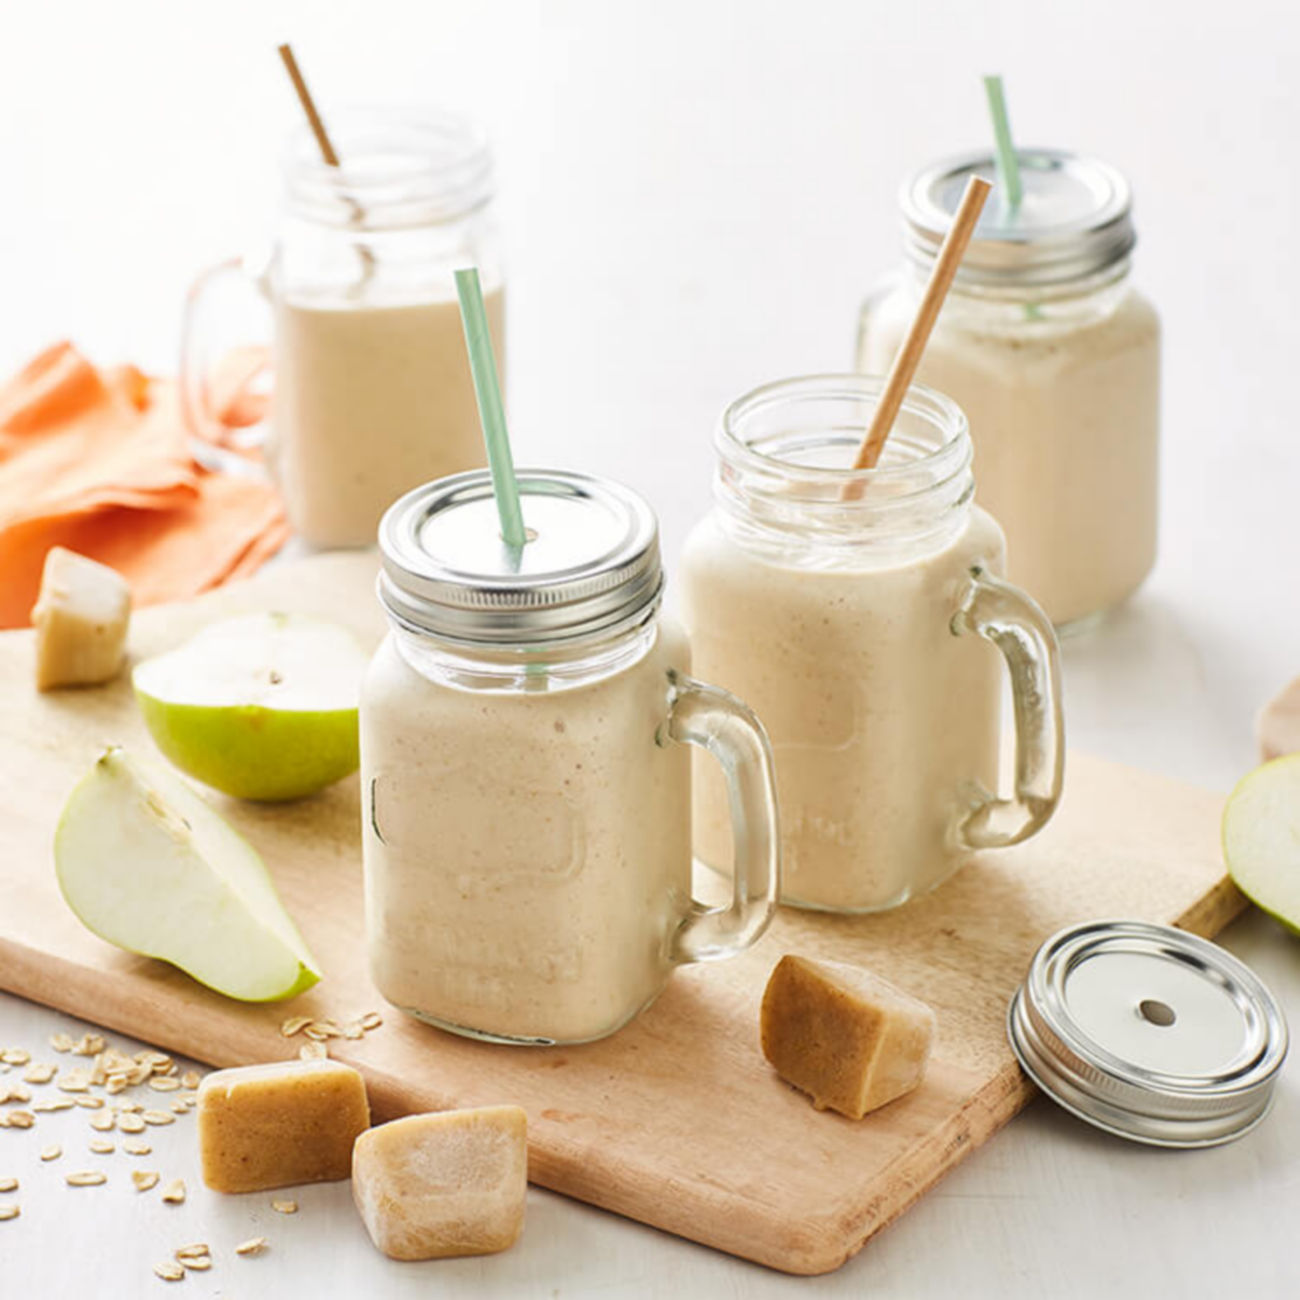 https://foodhub.scene7.com/is/image/woolworthsltdprod/1902-pear-smoothie-cubes:Square-1300x1300